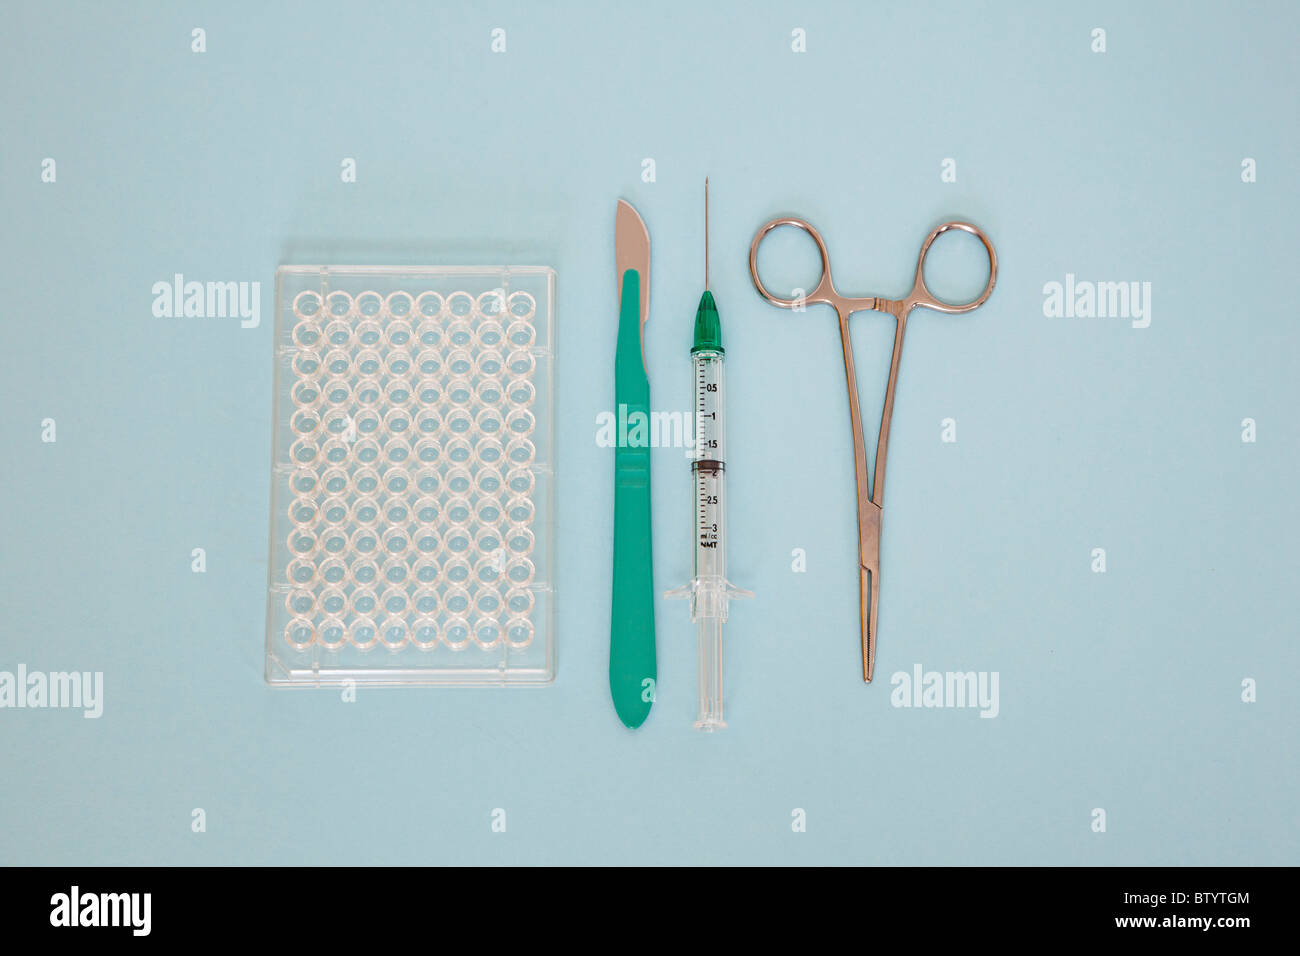 medical research tools Stock Photo